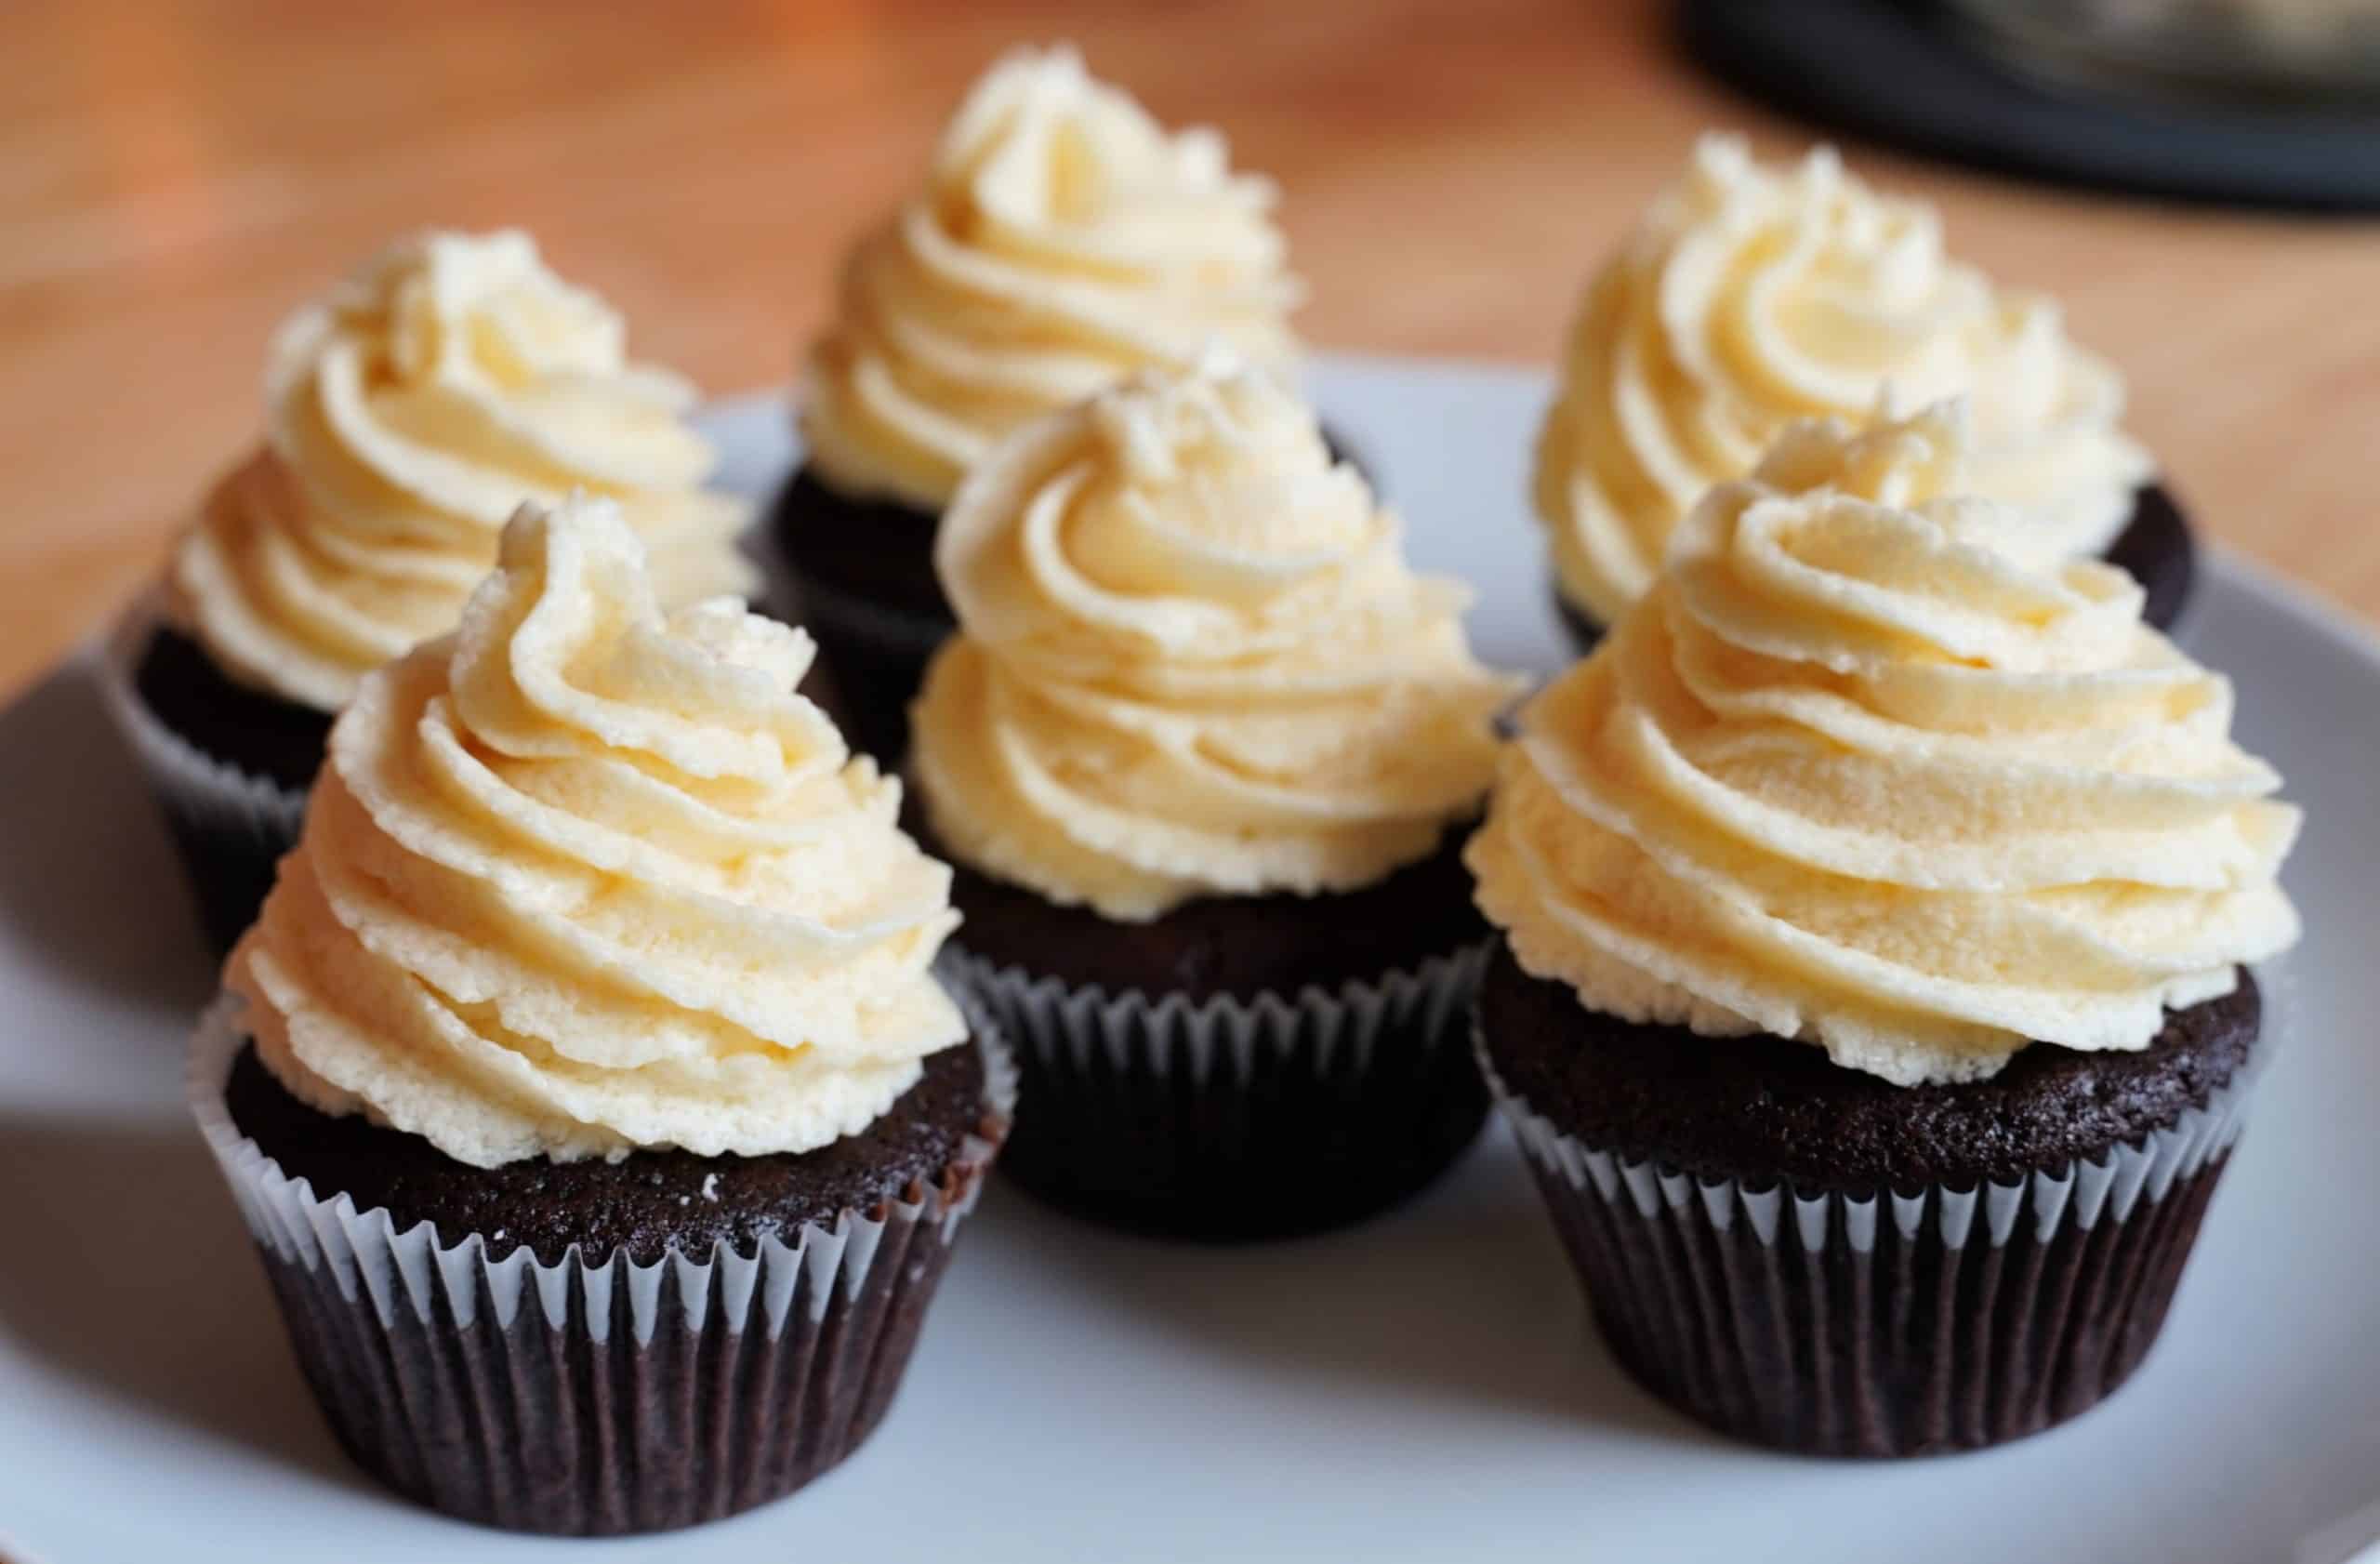 Six chocolate cupcakes topped with swirls of cream. 